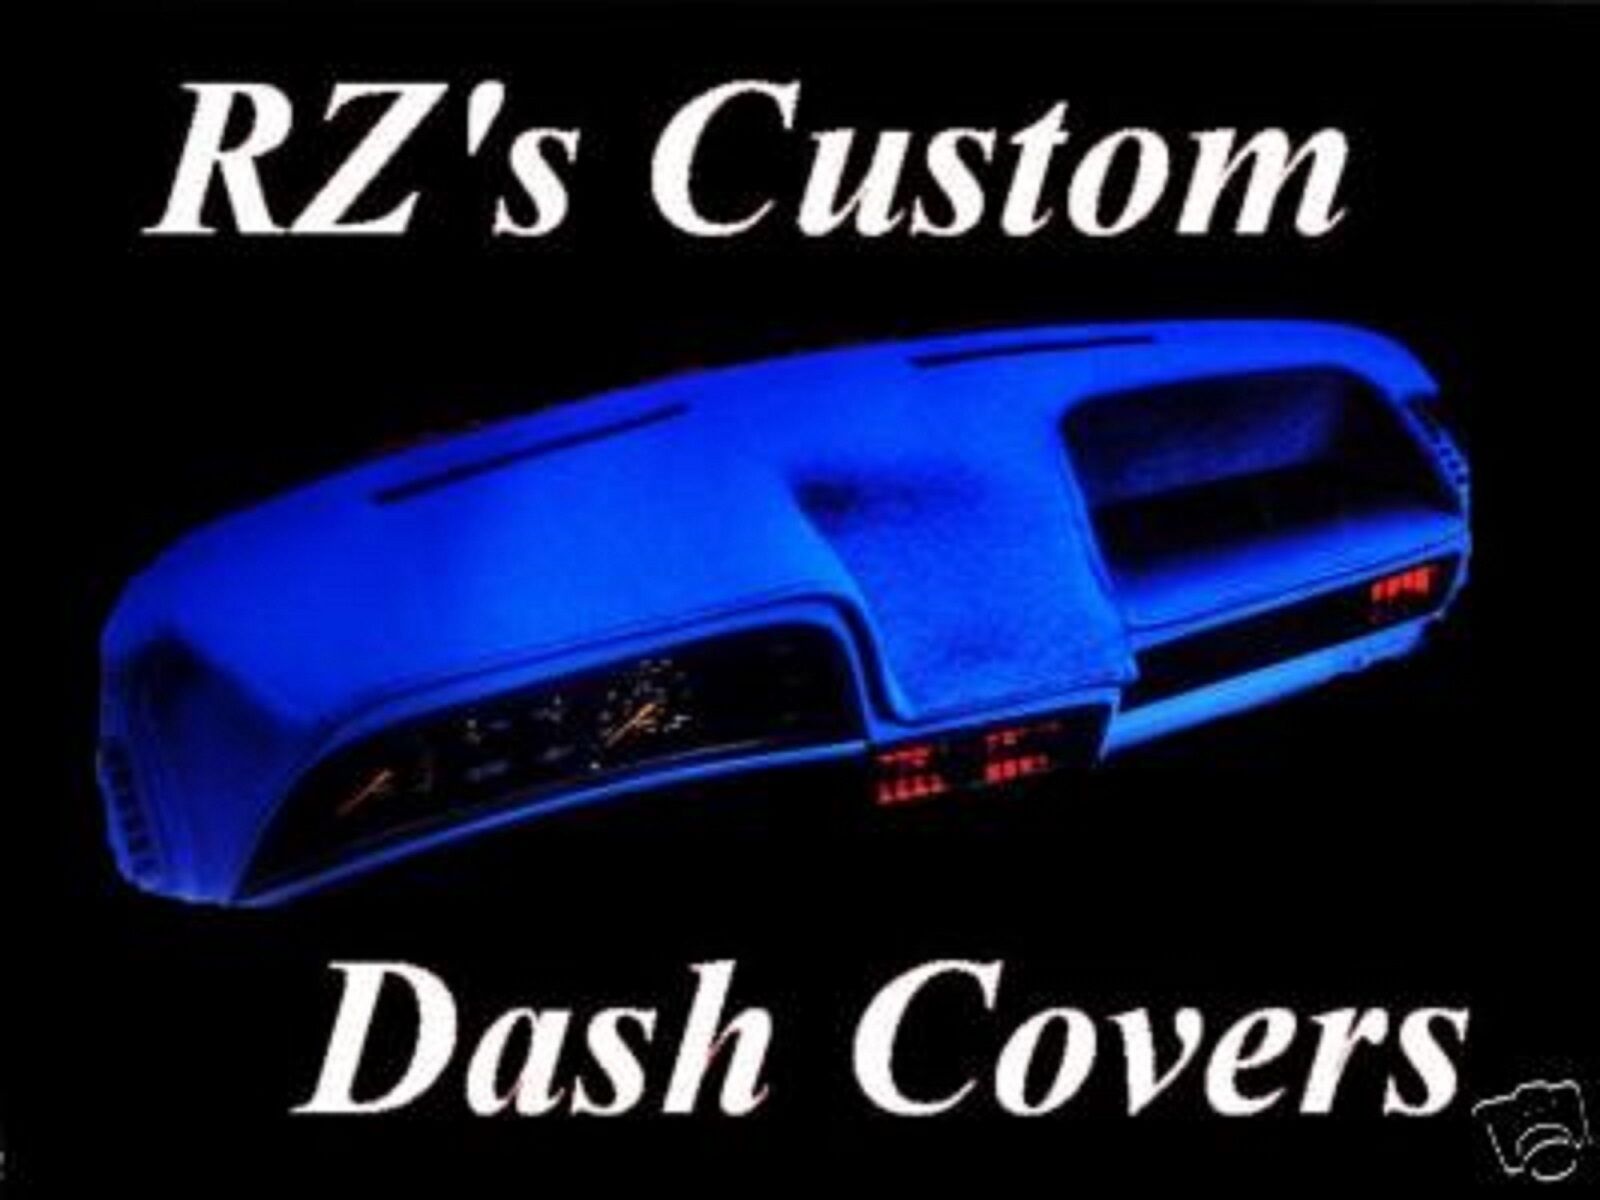 1998-2006 CHEVROLET S10 PICKUP  DASH COVER MAT  DASHMAT  all colors available